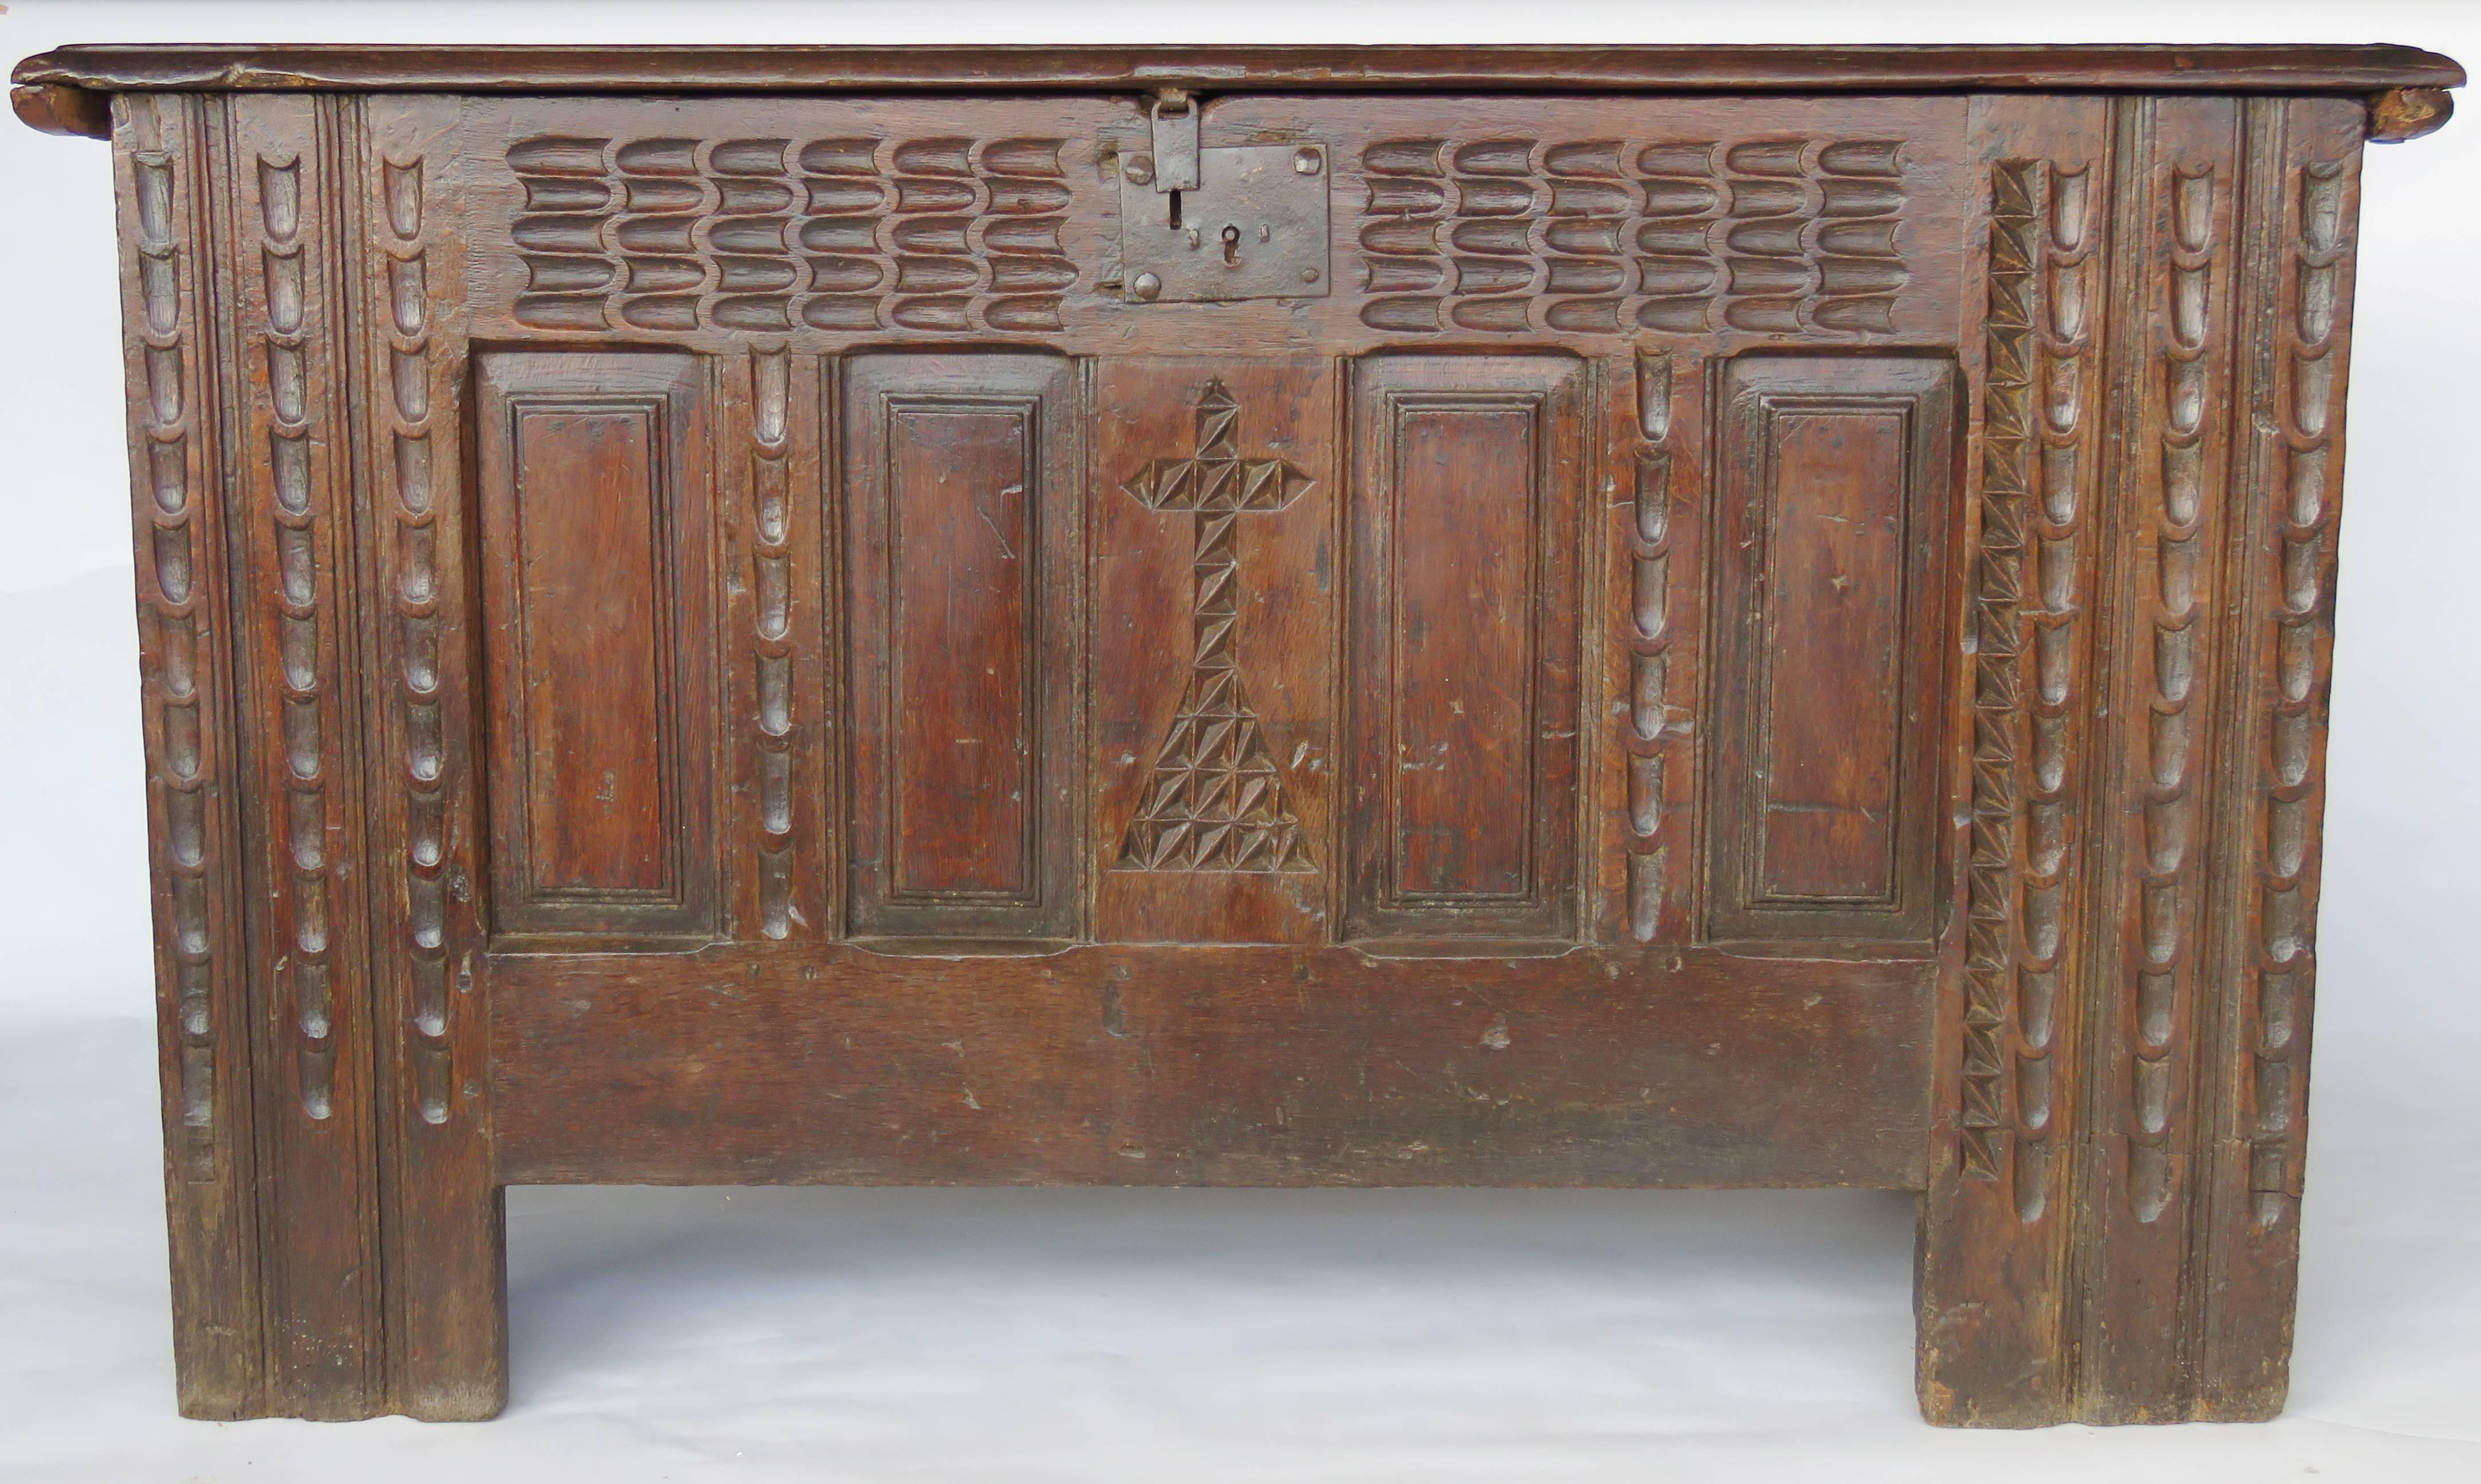 Rectangular hinged molded top over a deeply carved case decorated with central cross, surrounded with panels and chip-carved frieze, panelling on both sides, original iron shield lock and hardware.